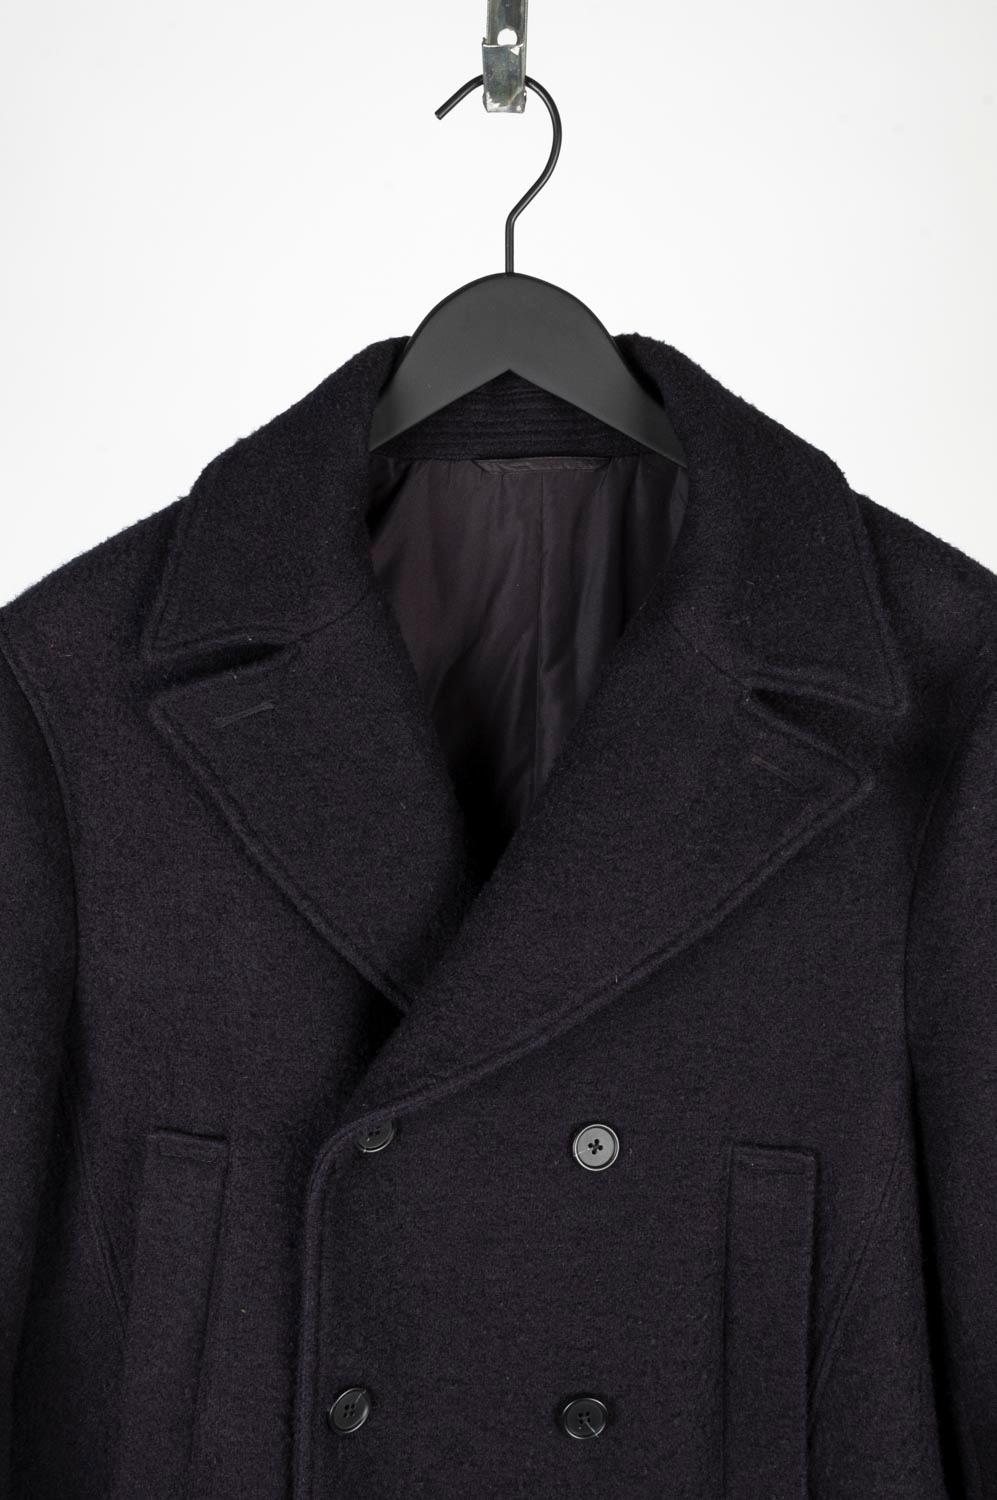 100% genuine Z Zegna Peacoat, NCODE
Color: Navy
(An actual color may a bit vary due to individual computer screen interpretation)
Material: 72% wool, 28% nylon
Tag size: XL
This coat is great quality item. Rate 9 of 10, excellent close to